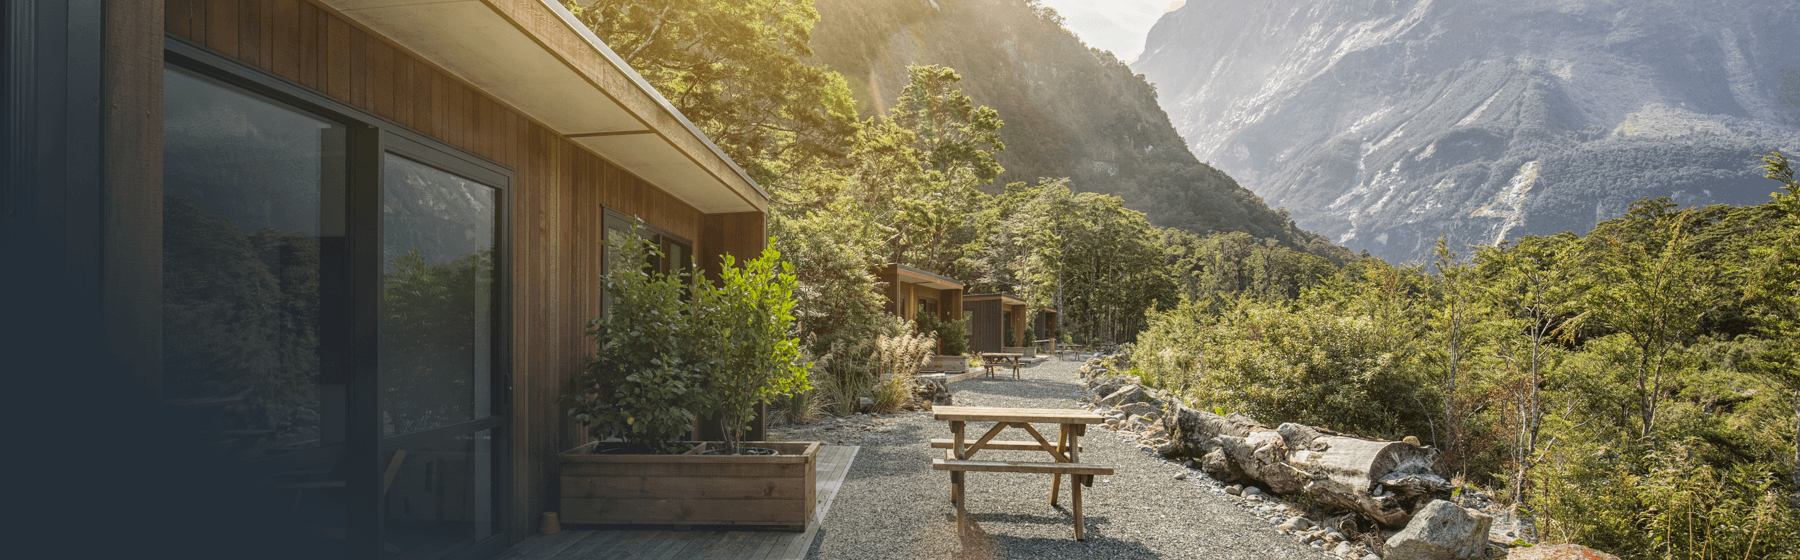 Picnic tables outside Milford Sound Lodge Mountain View Chalet accommodation.